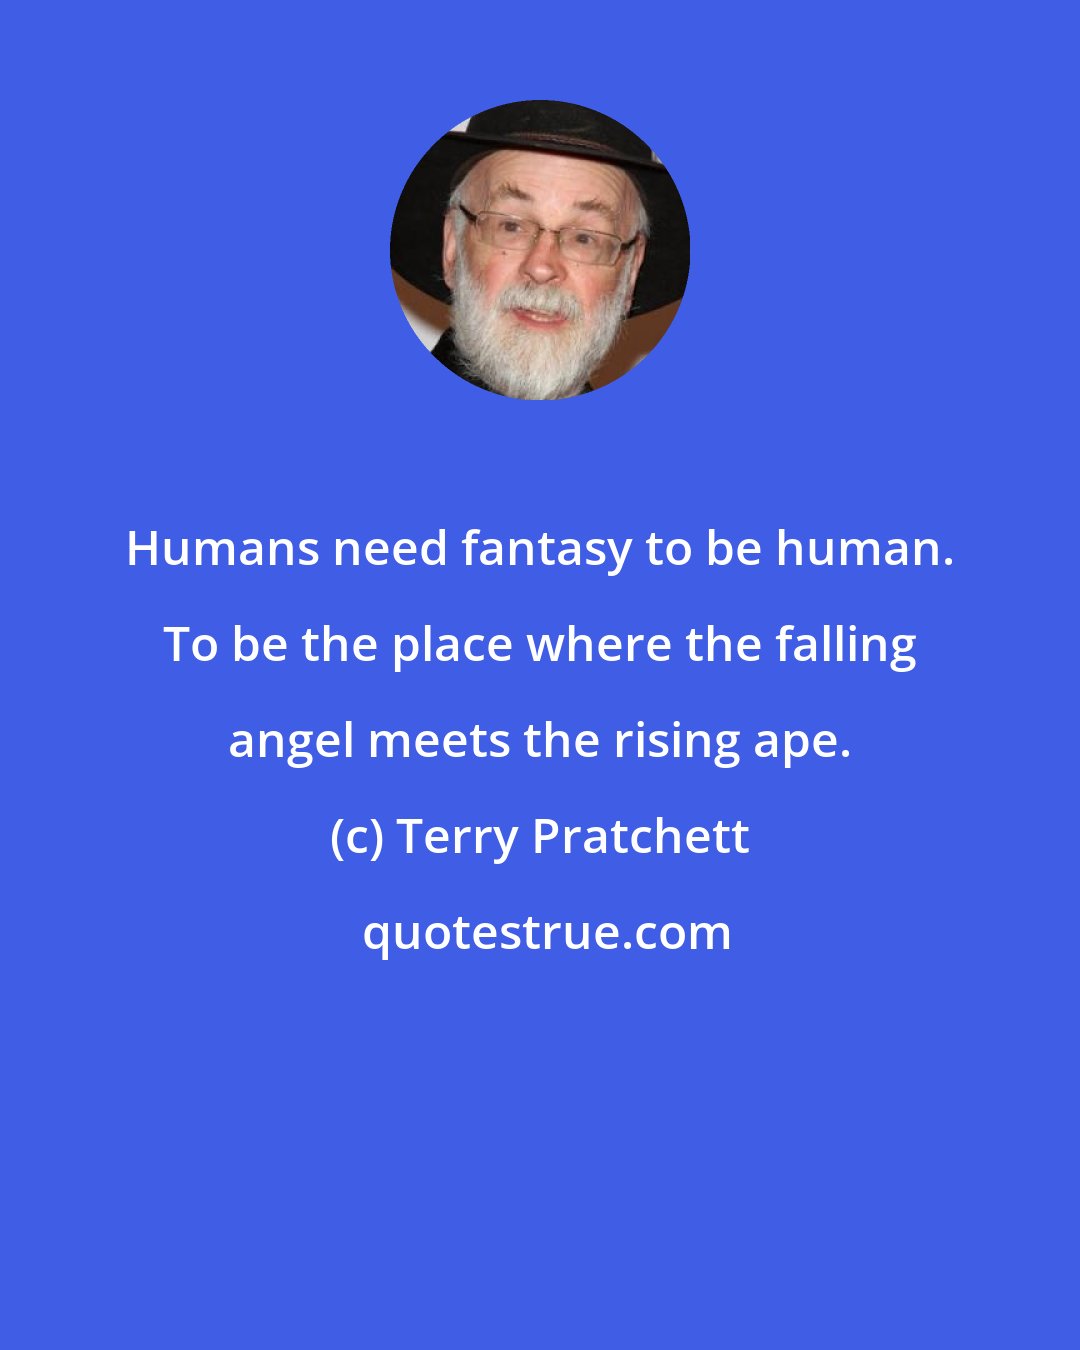 Terry Pratchett: Humans need fantasy to be human. To be the place where the falling angel meets the rising ape.